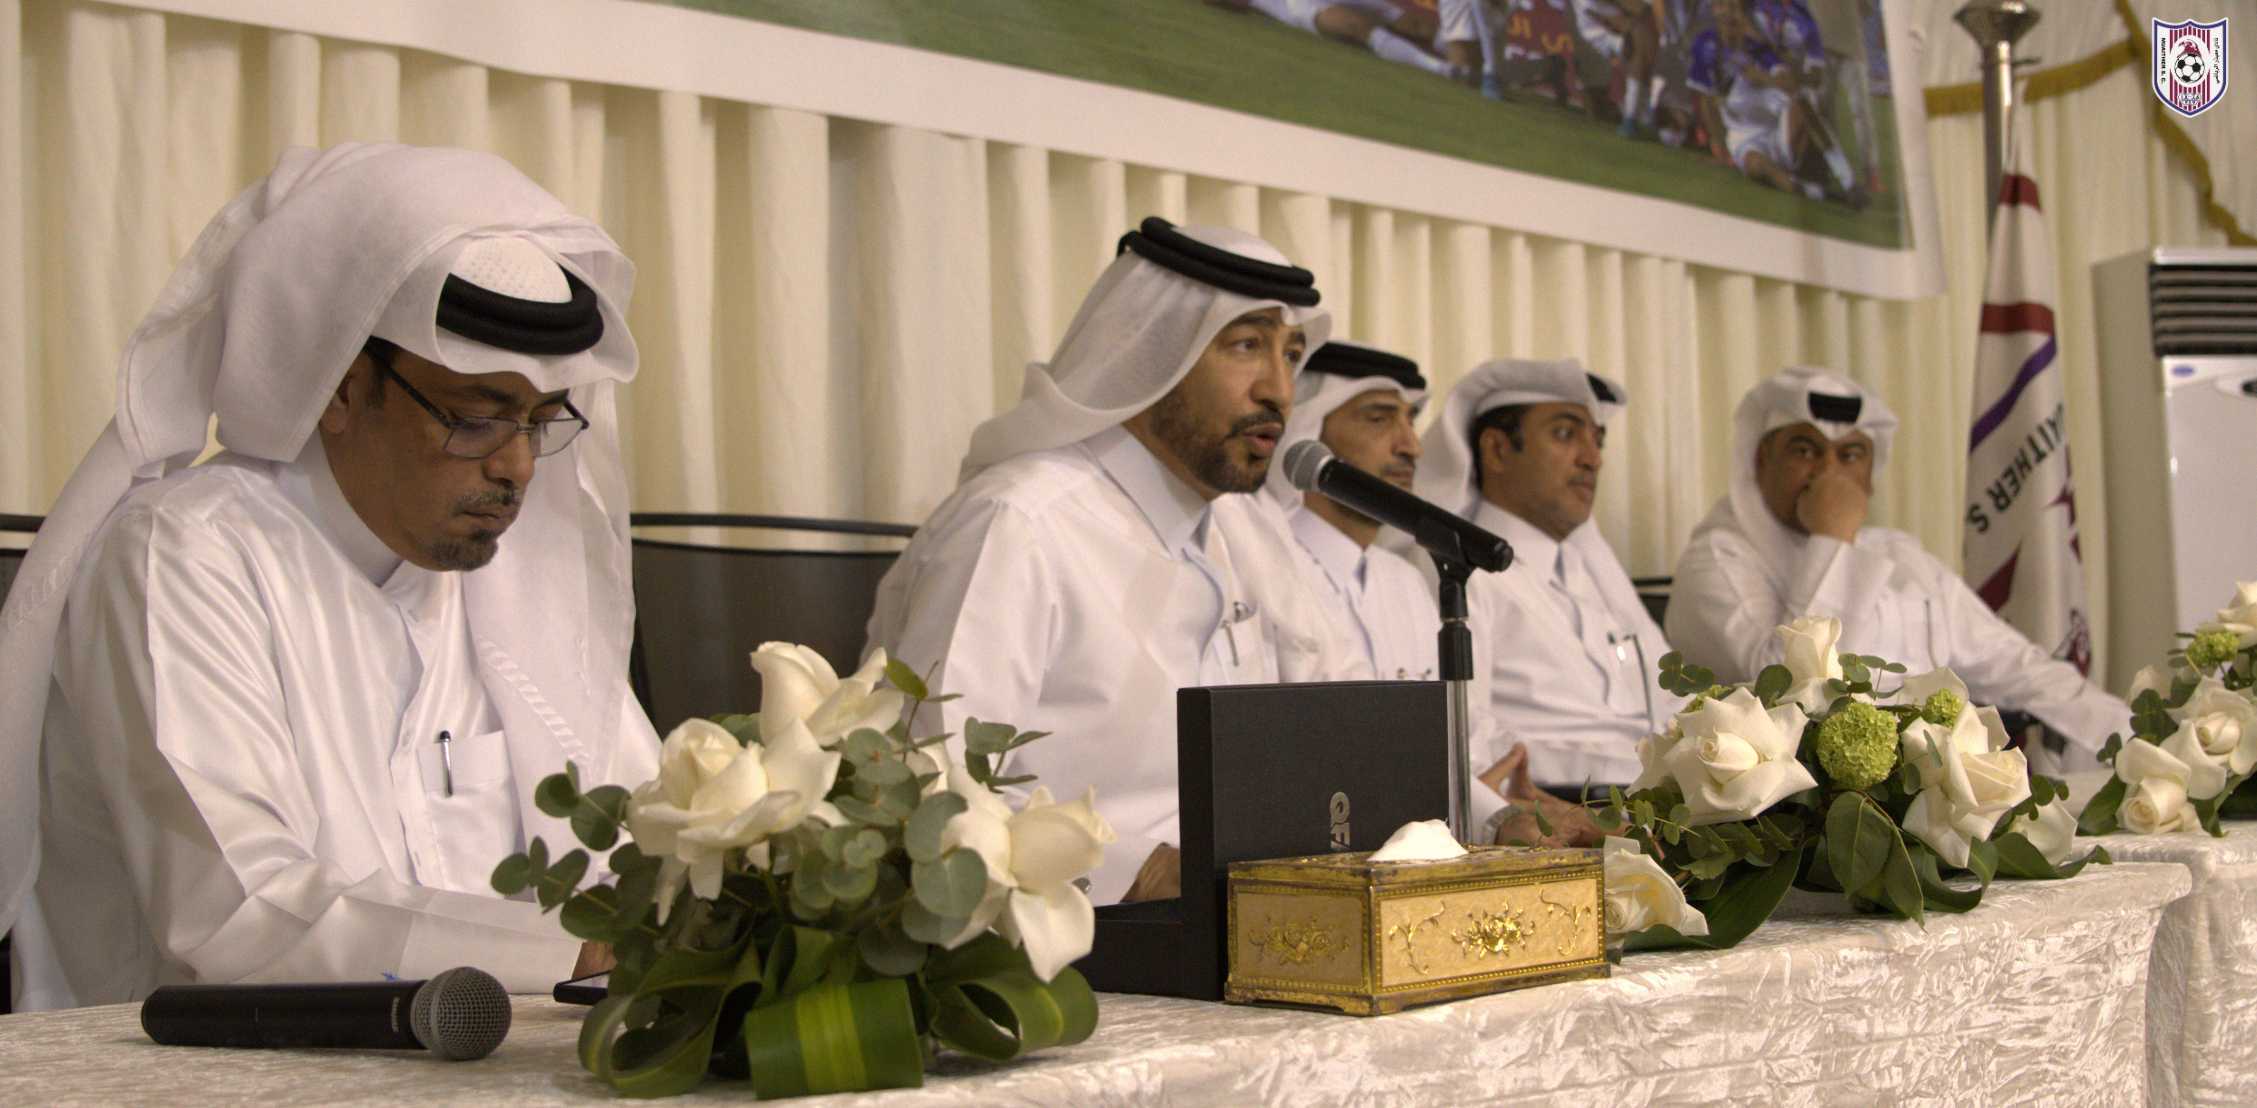 During a ceremony held at the club's headquarters, Muaither honors the first team players